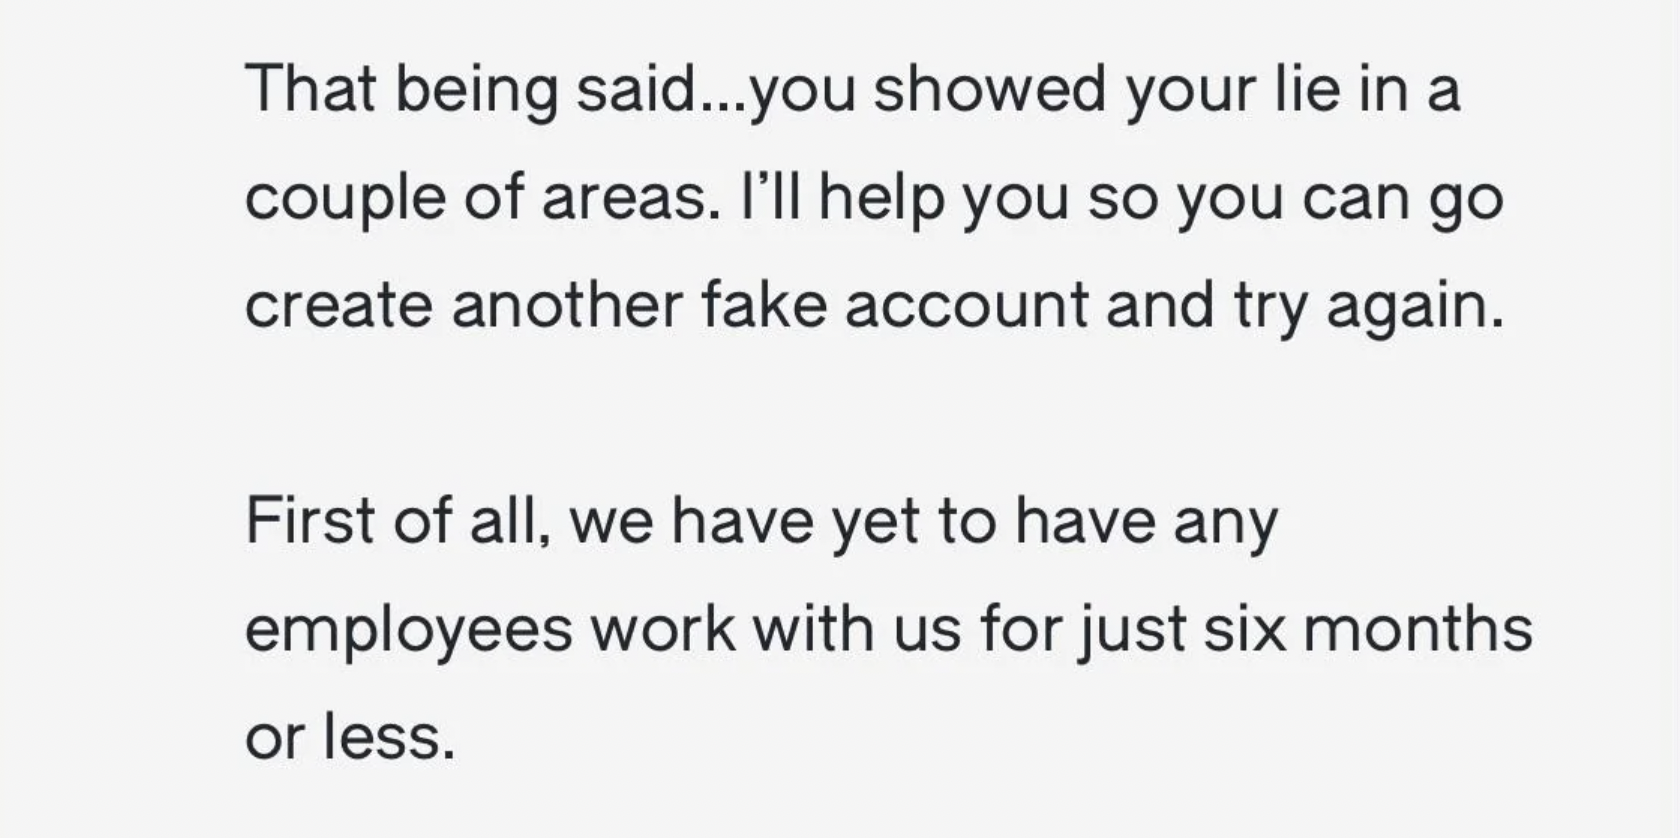 paper - That being said...you showed your lie in a couple of areas. I'll help you so you can go create another fake account and try again. First of all, we have yet to have any employees work with us for just six months or less.